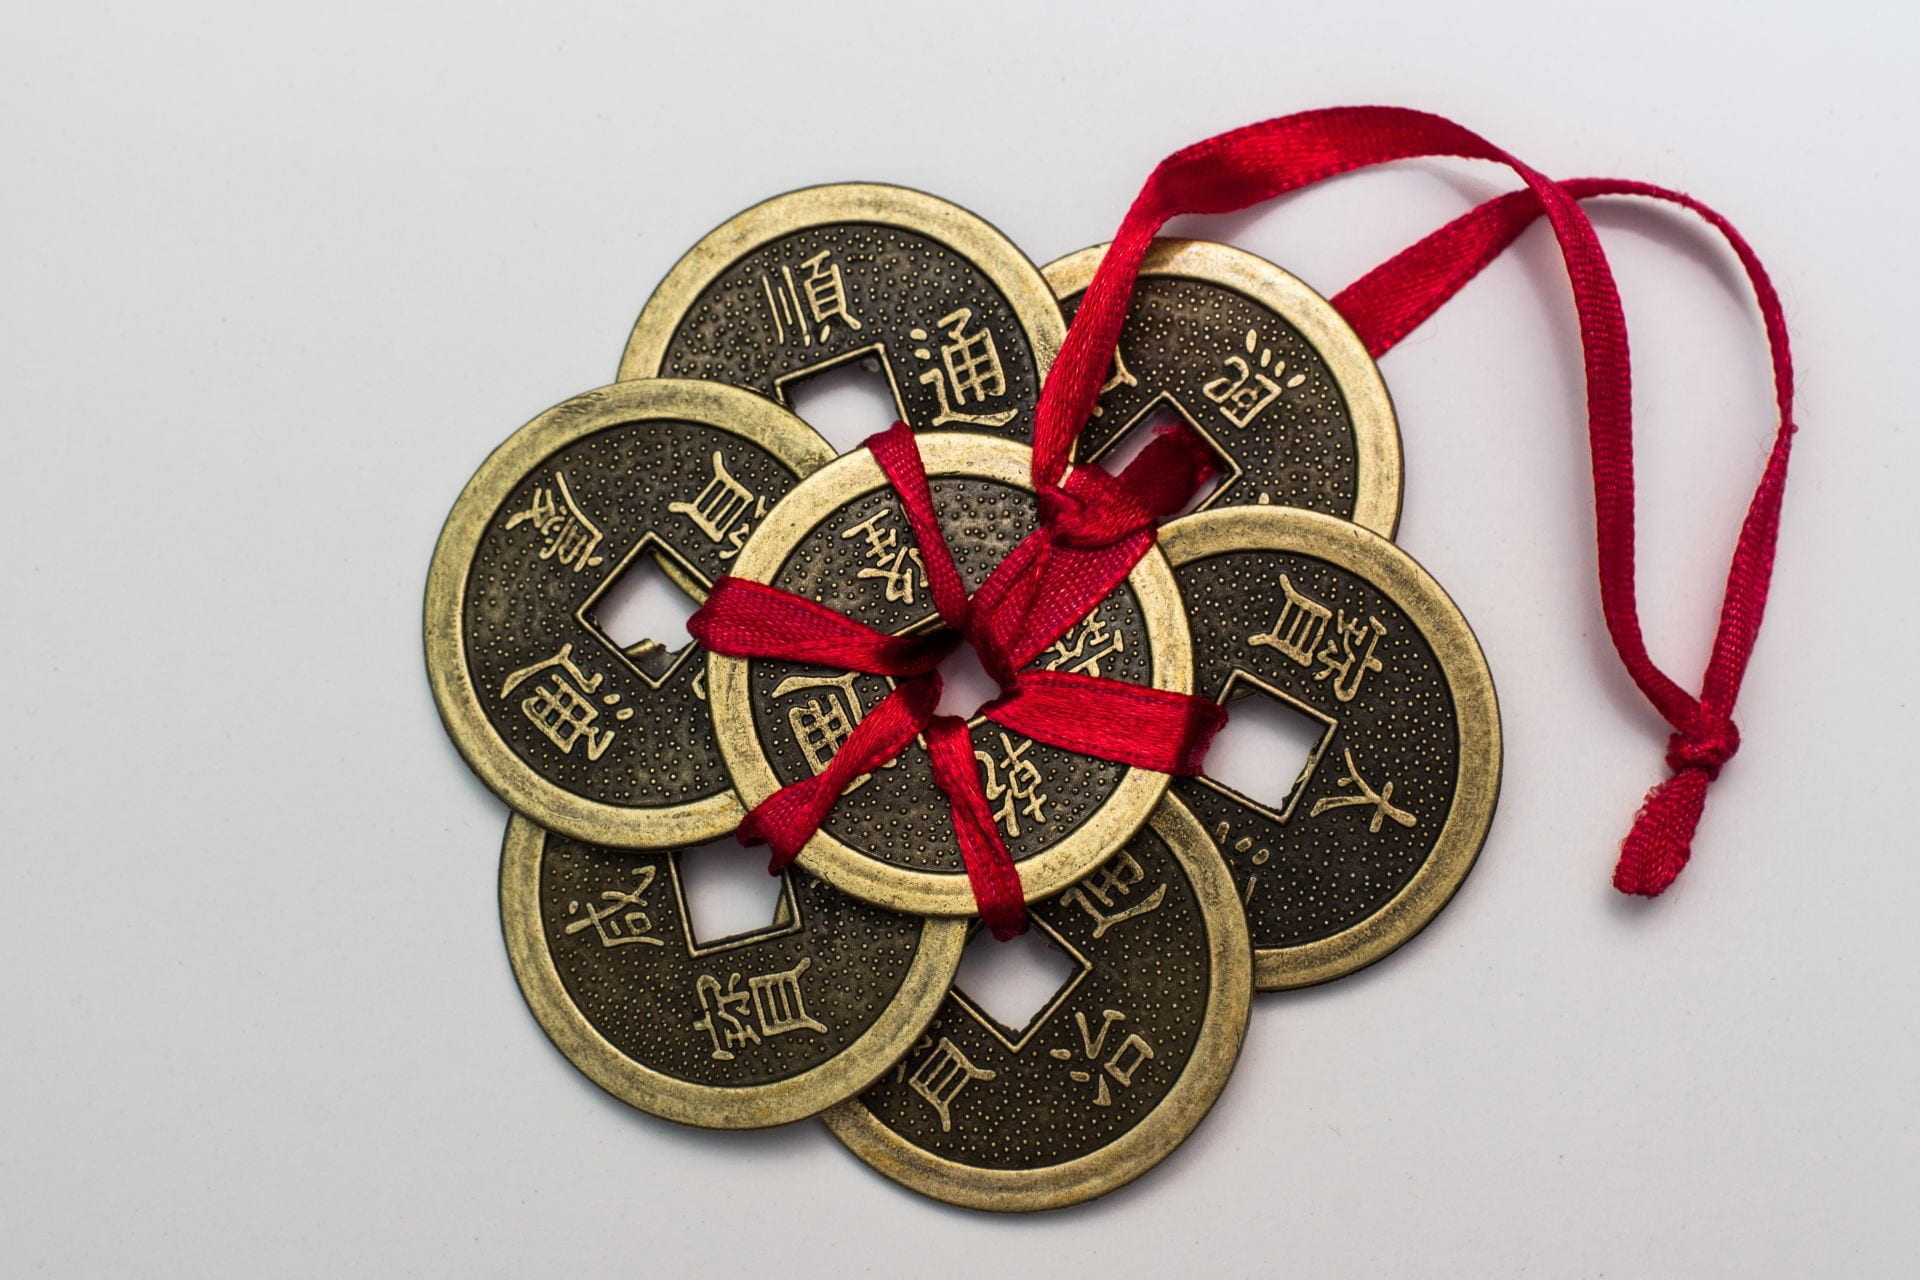 Seven iron rings with Chinese characters in gold and a red ribbon tied on the center ring on the left.